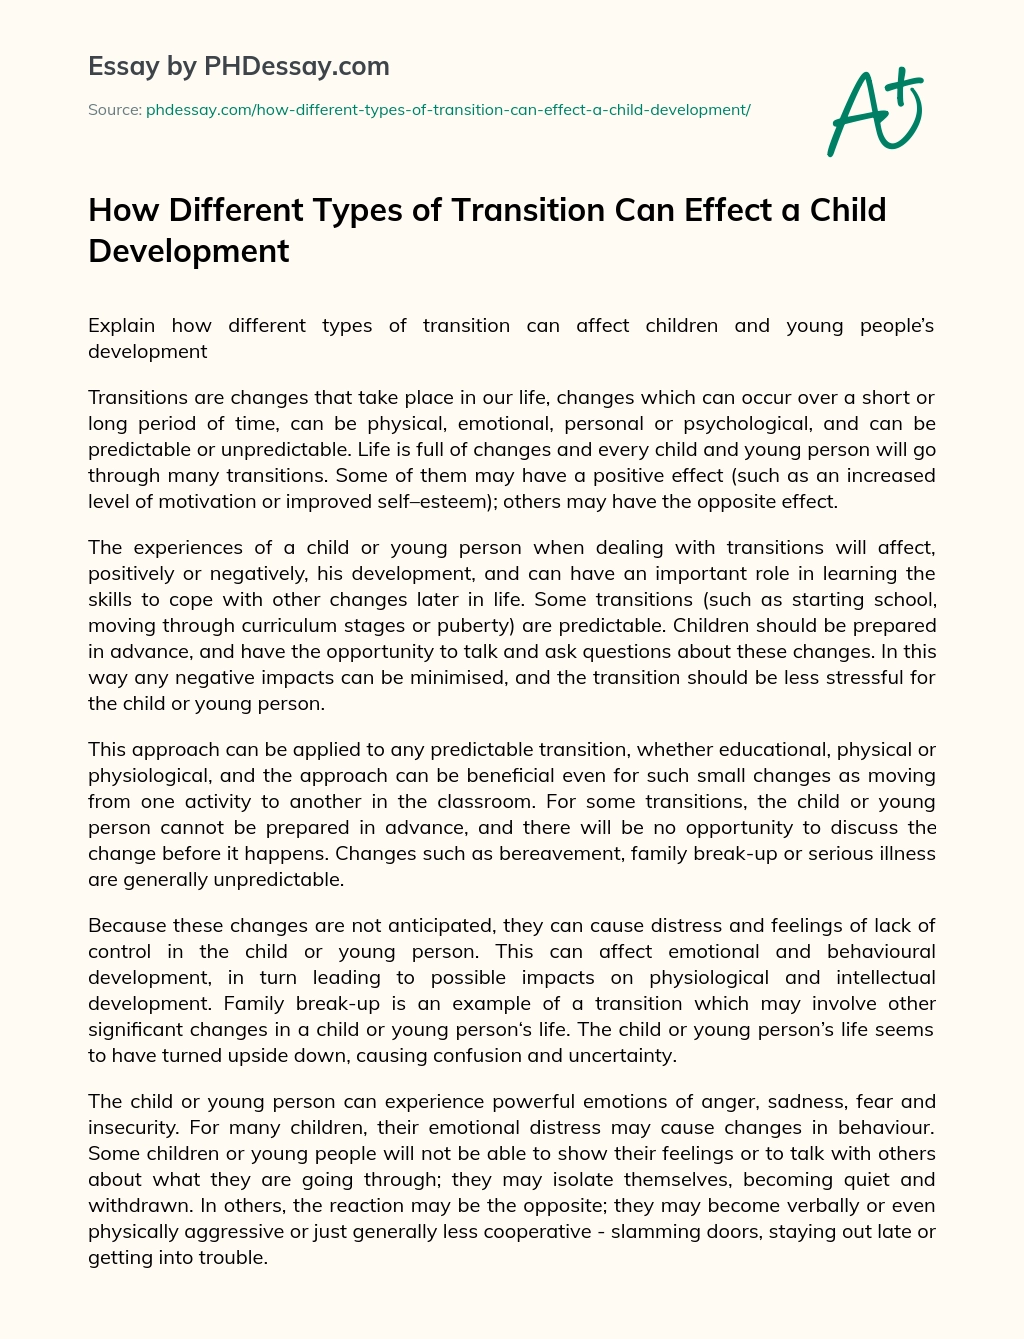 How Different Types of Transition Can Effect a Child Development essay